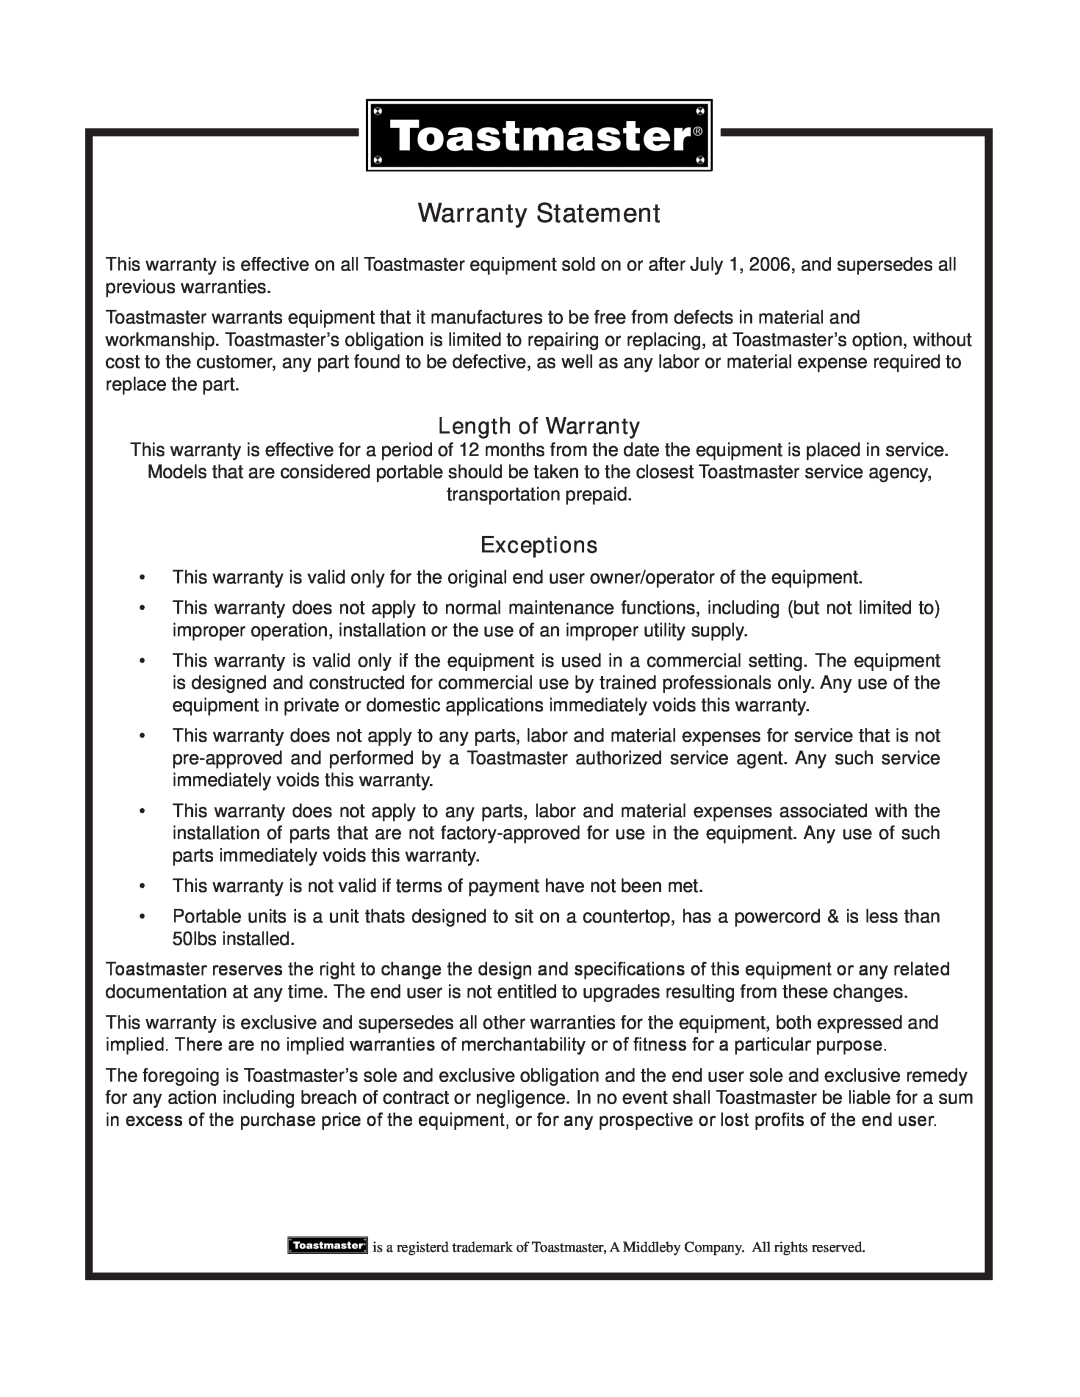 Toastmaster TMFE30, TMFE15 manual Length of Warranty, Exceptions, Warranty Statement 